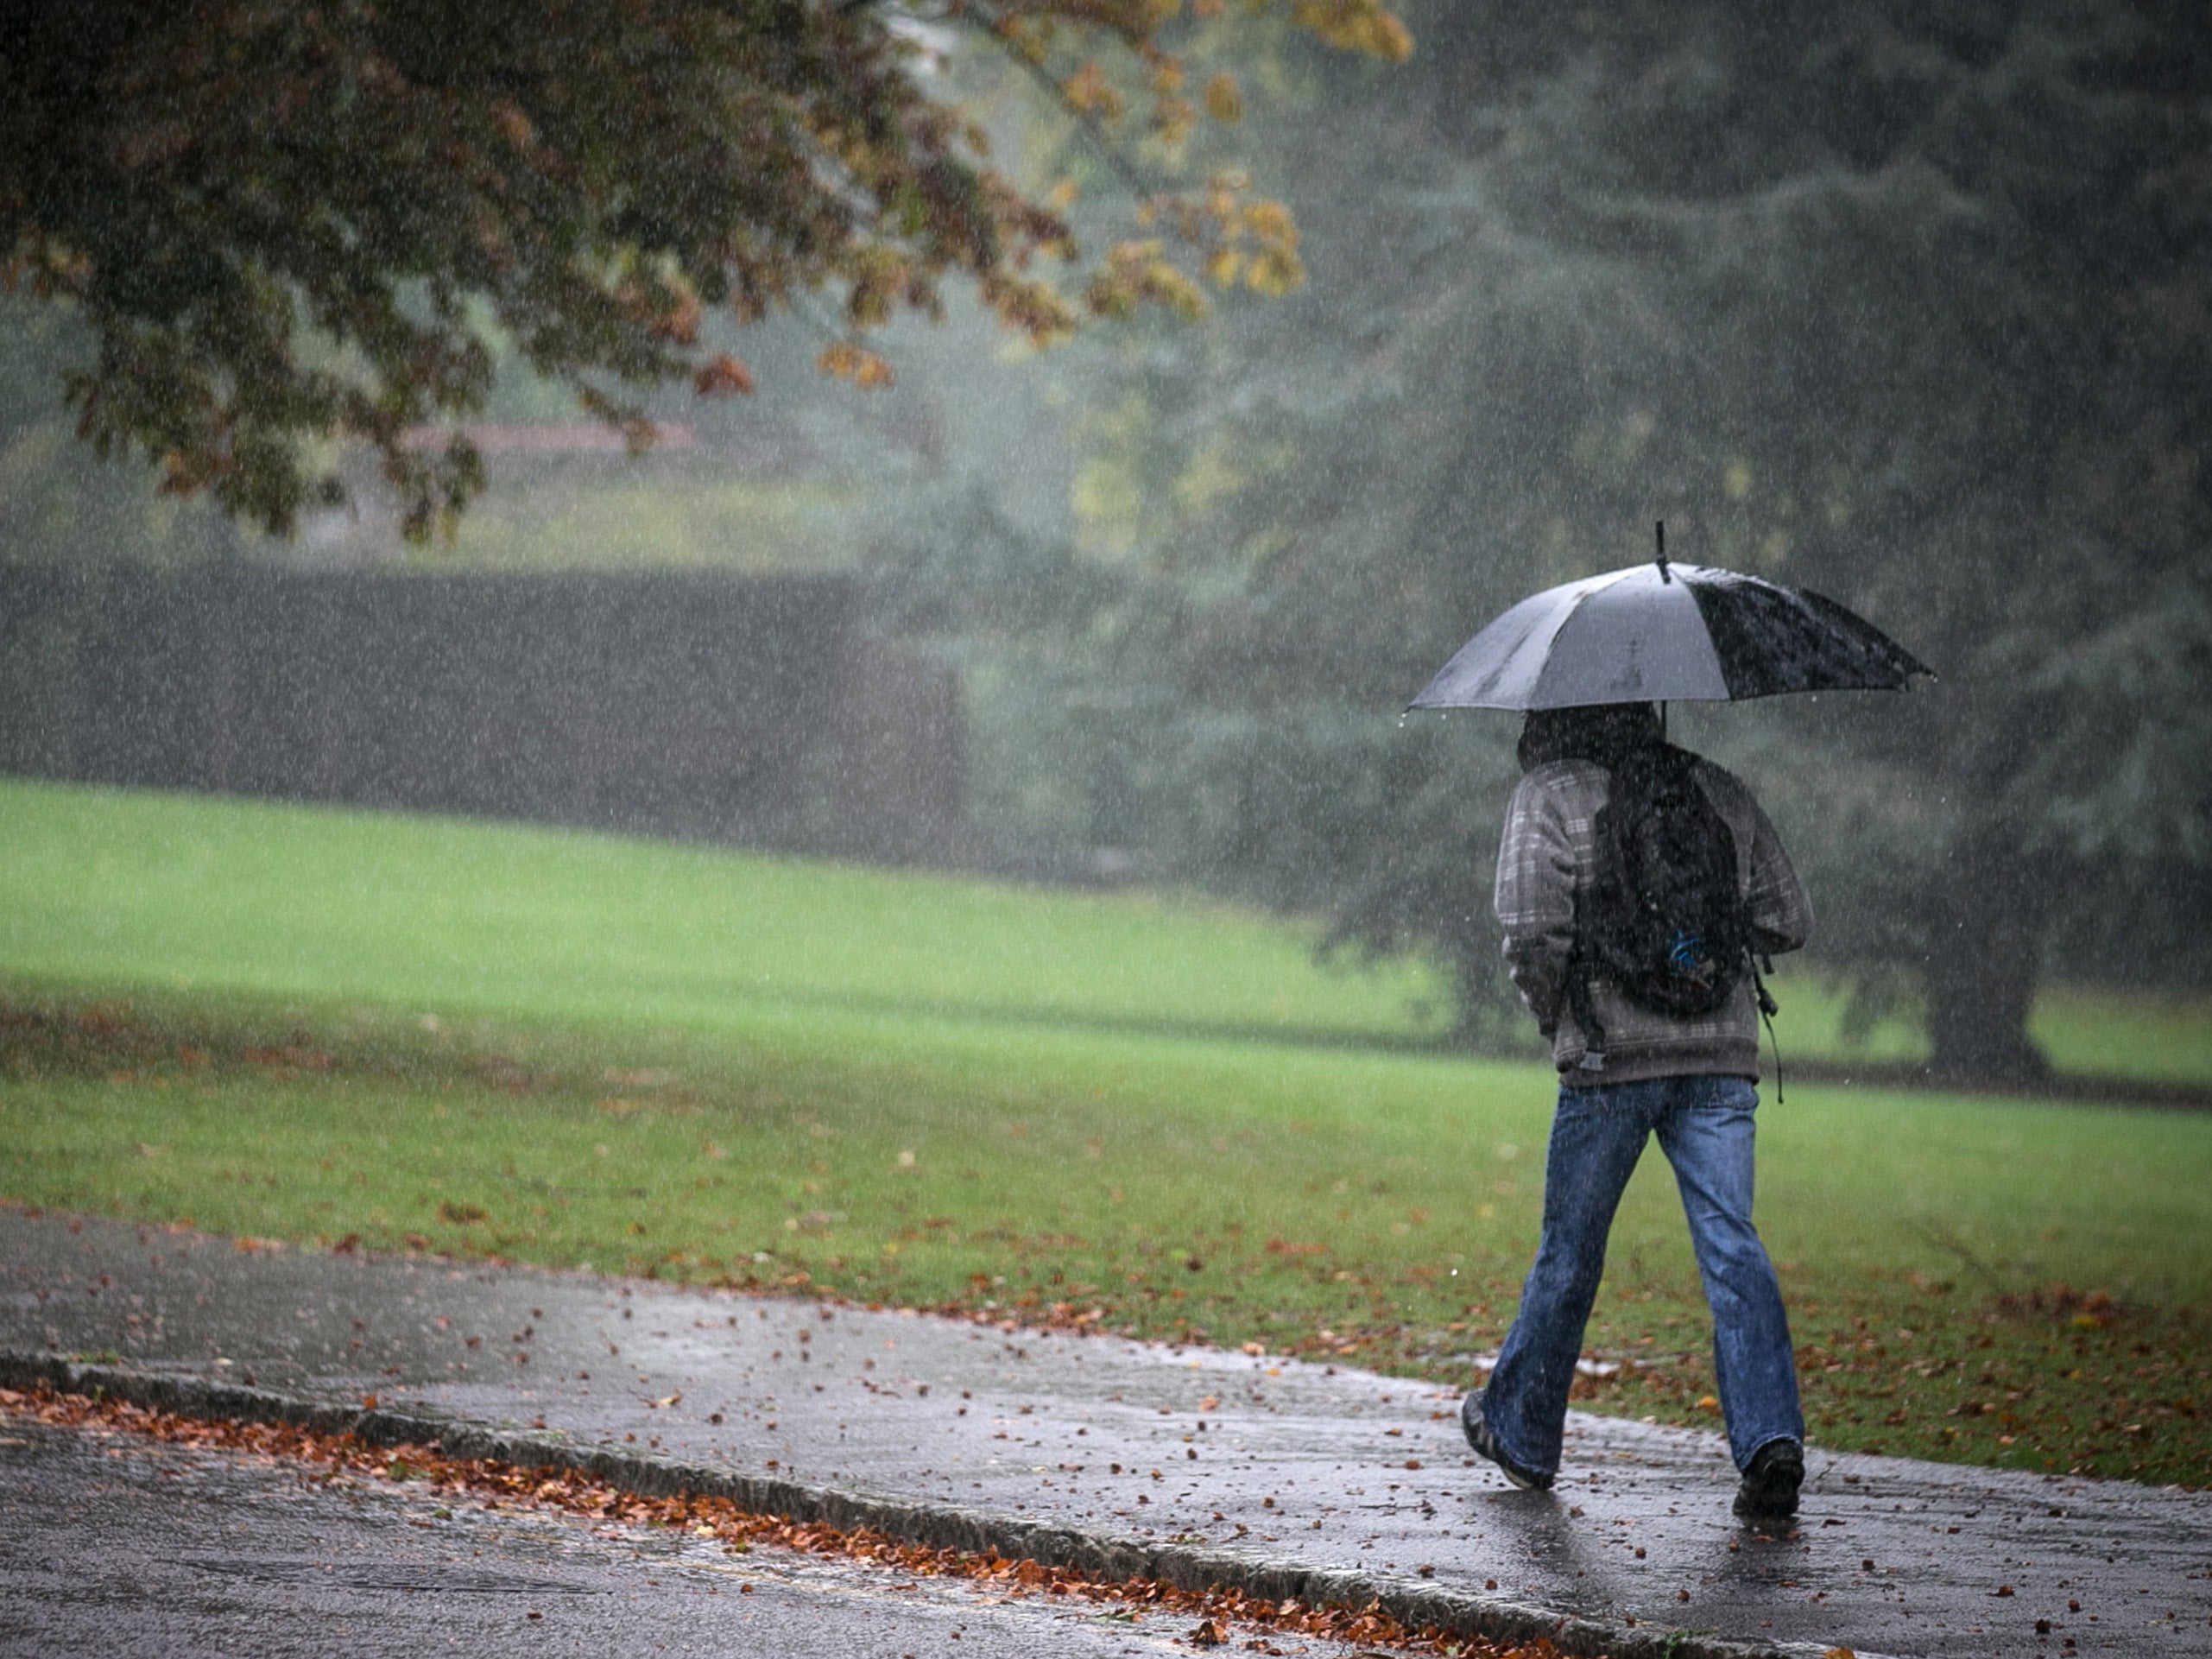 Showers are expected, with possible coastal gales in the south and southwest